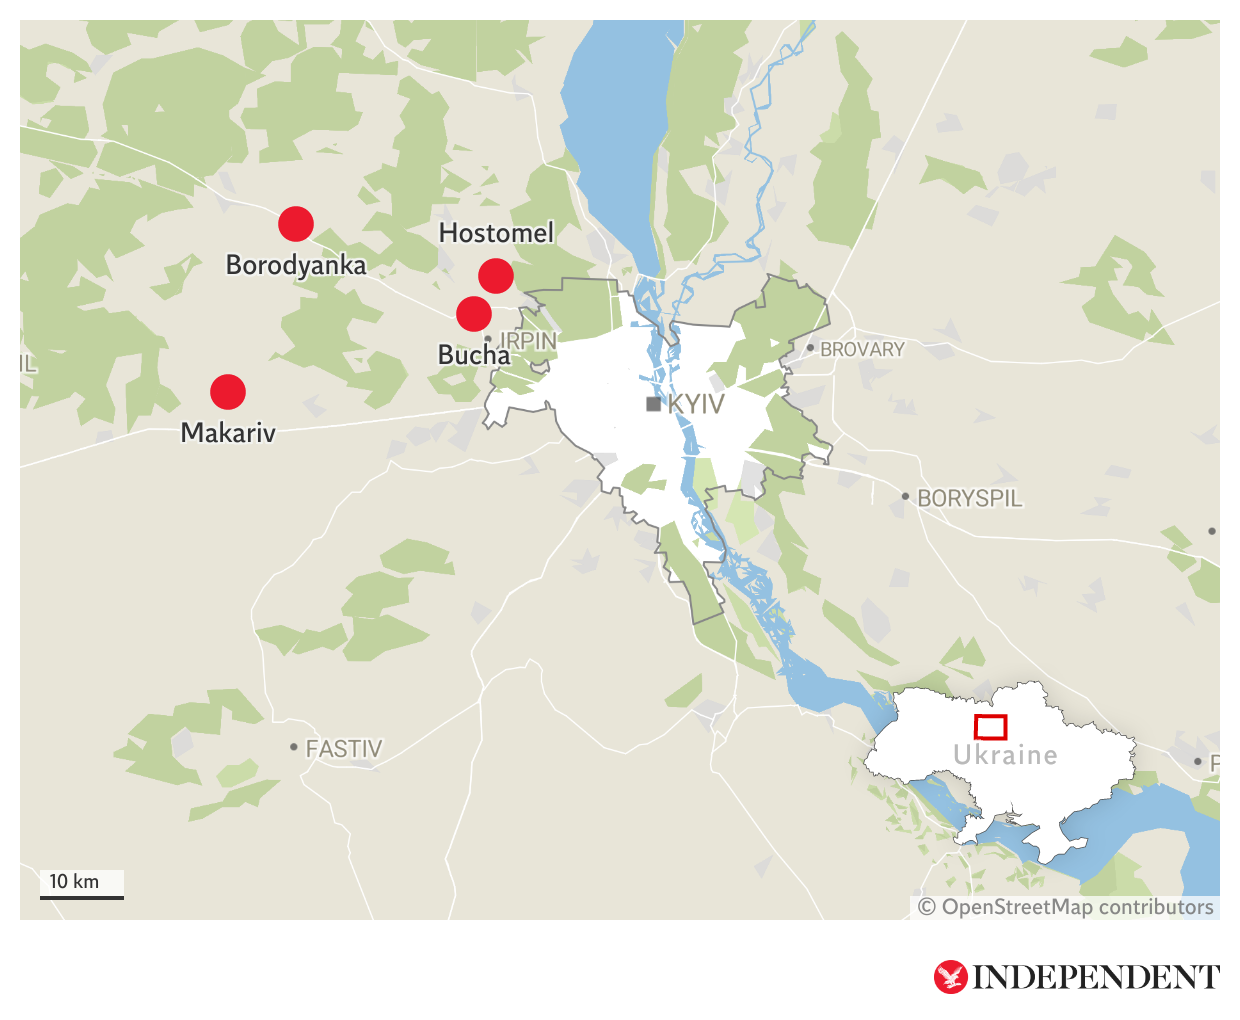 Areas visited by The Independent in the wake of the Russian retreat